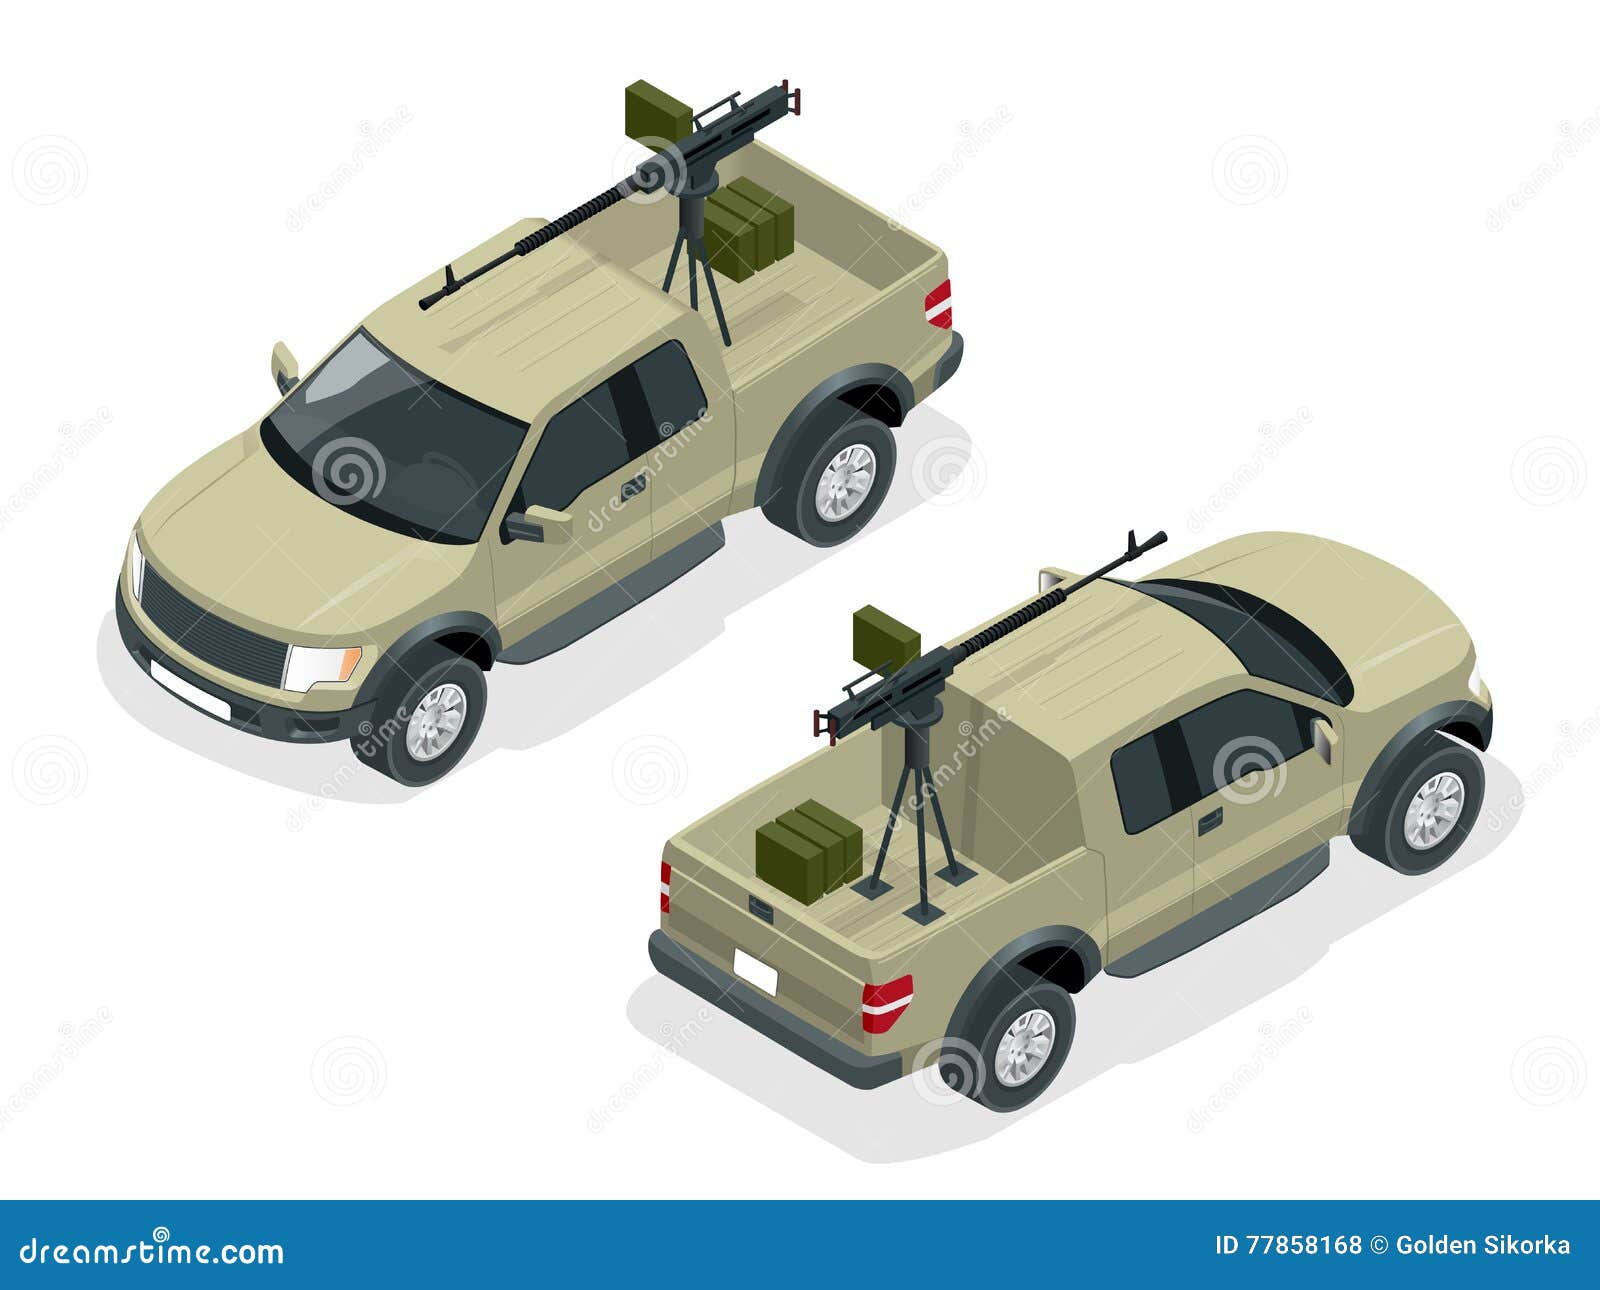 isometric model of pickup truck armed with machine gun. spec ops police officers swat in black uniform. soldier, officer